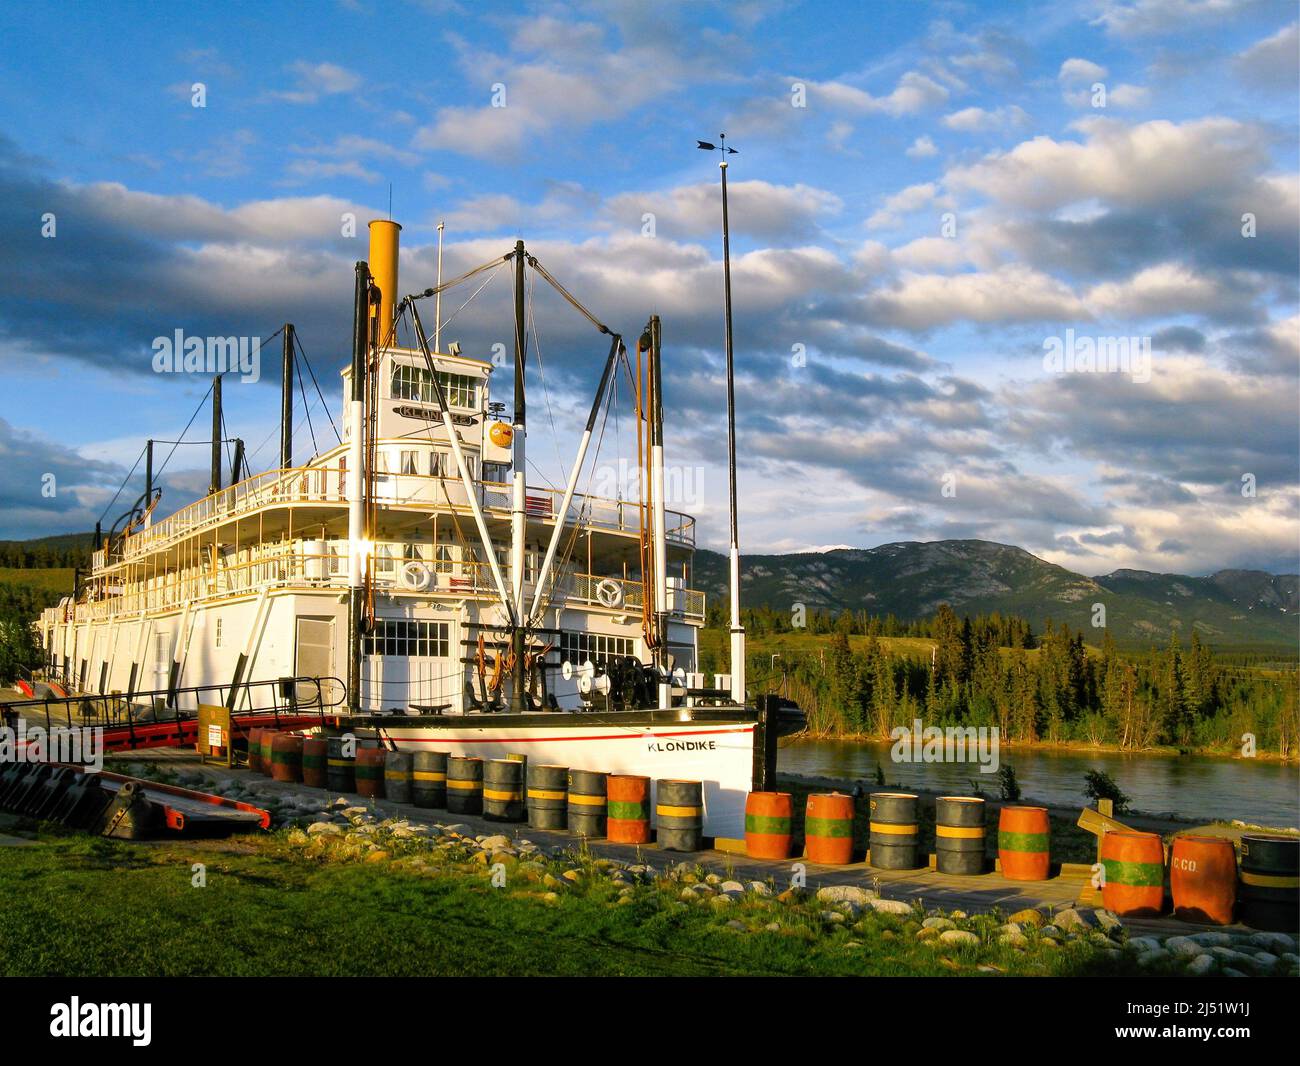 The sternwheeler S.S. Klondike located in Whitehorse, Yukon, Canada.  It travelled the upper Yukon River between Whitehorse and Dawson City. Stock Photo